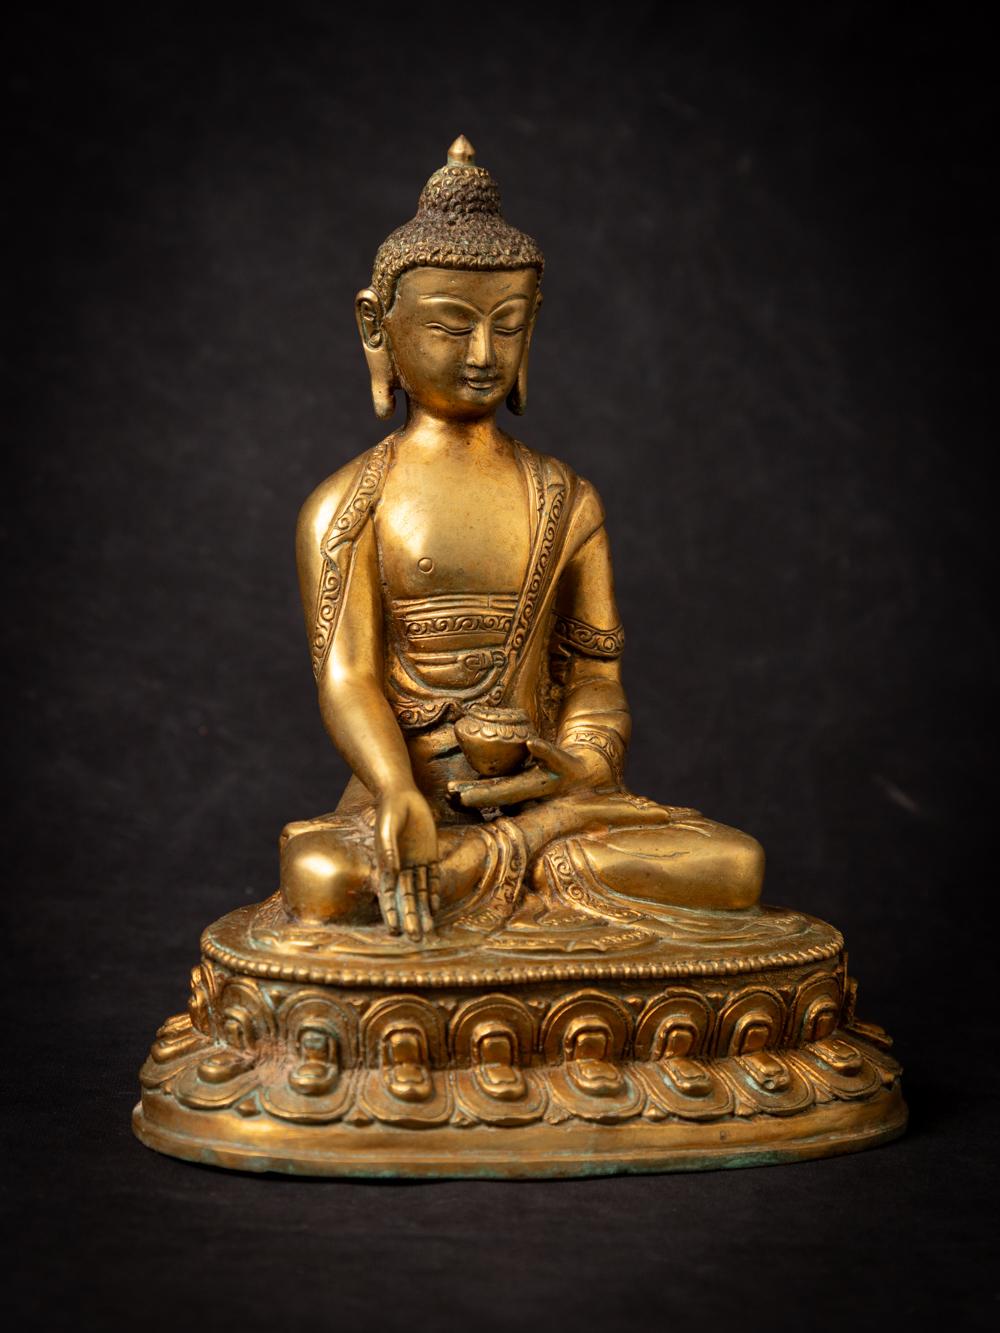 The old bronze Nepali Buddha statue is a remarkable and spiritually significant work of art. Crafted from bronze and adorned with fire gilding in 24-karat gold, this statue stands at a height of 21.6 cm, with measurements of 17.5 cm in width and